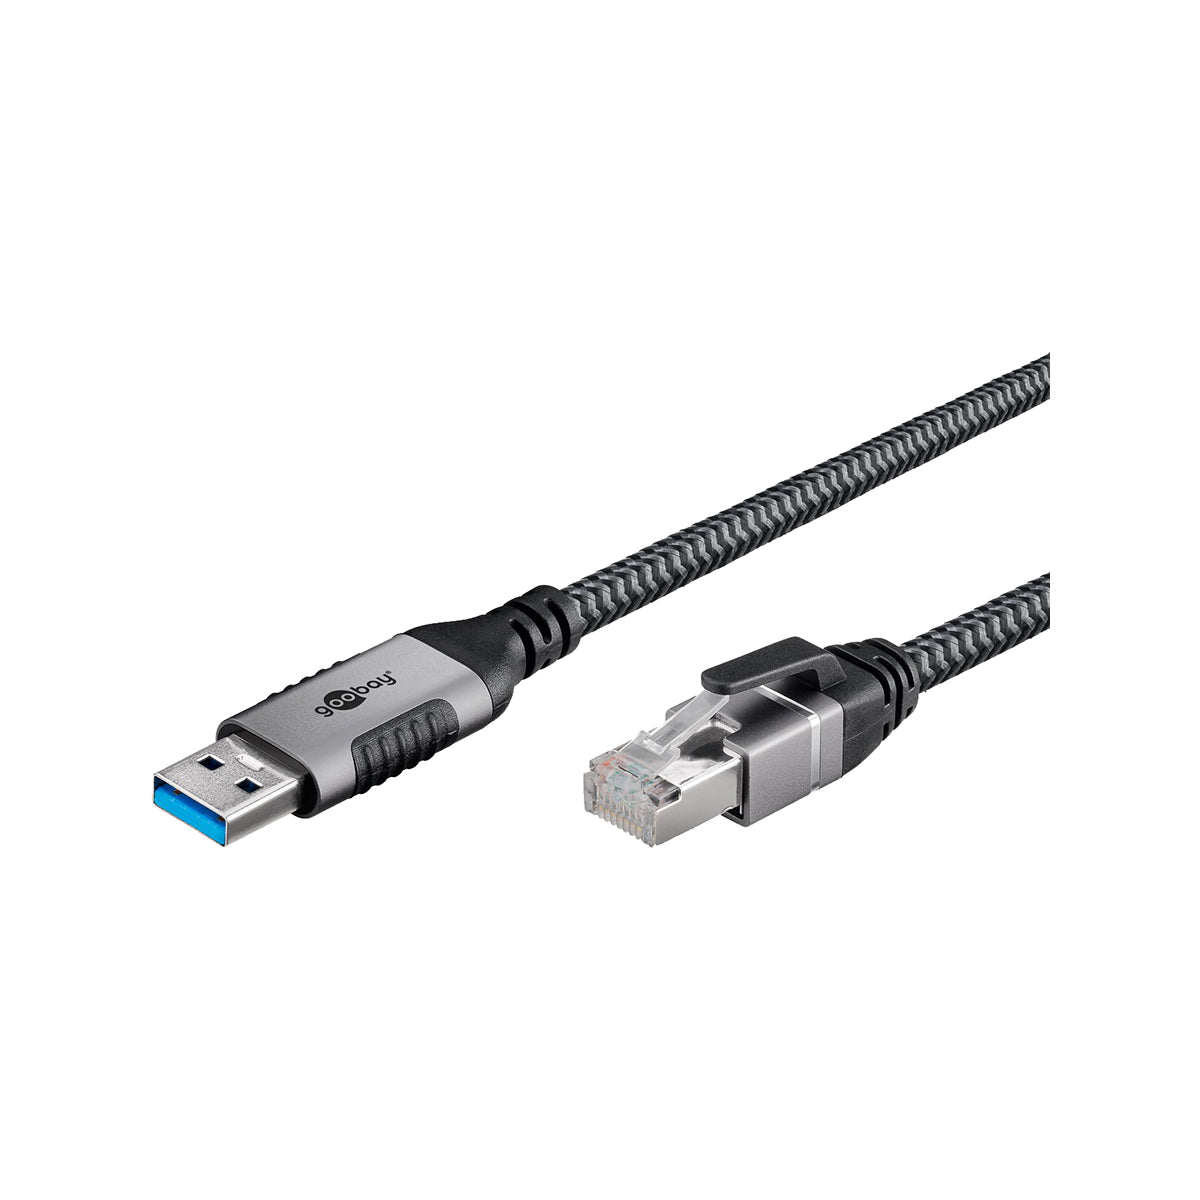 GooBay USB-A 3.0 to RJ45 Ethernet Cable 2m for PC/Laptop - Black